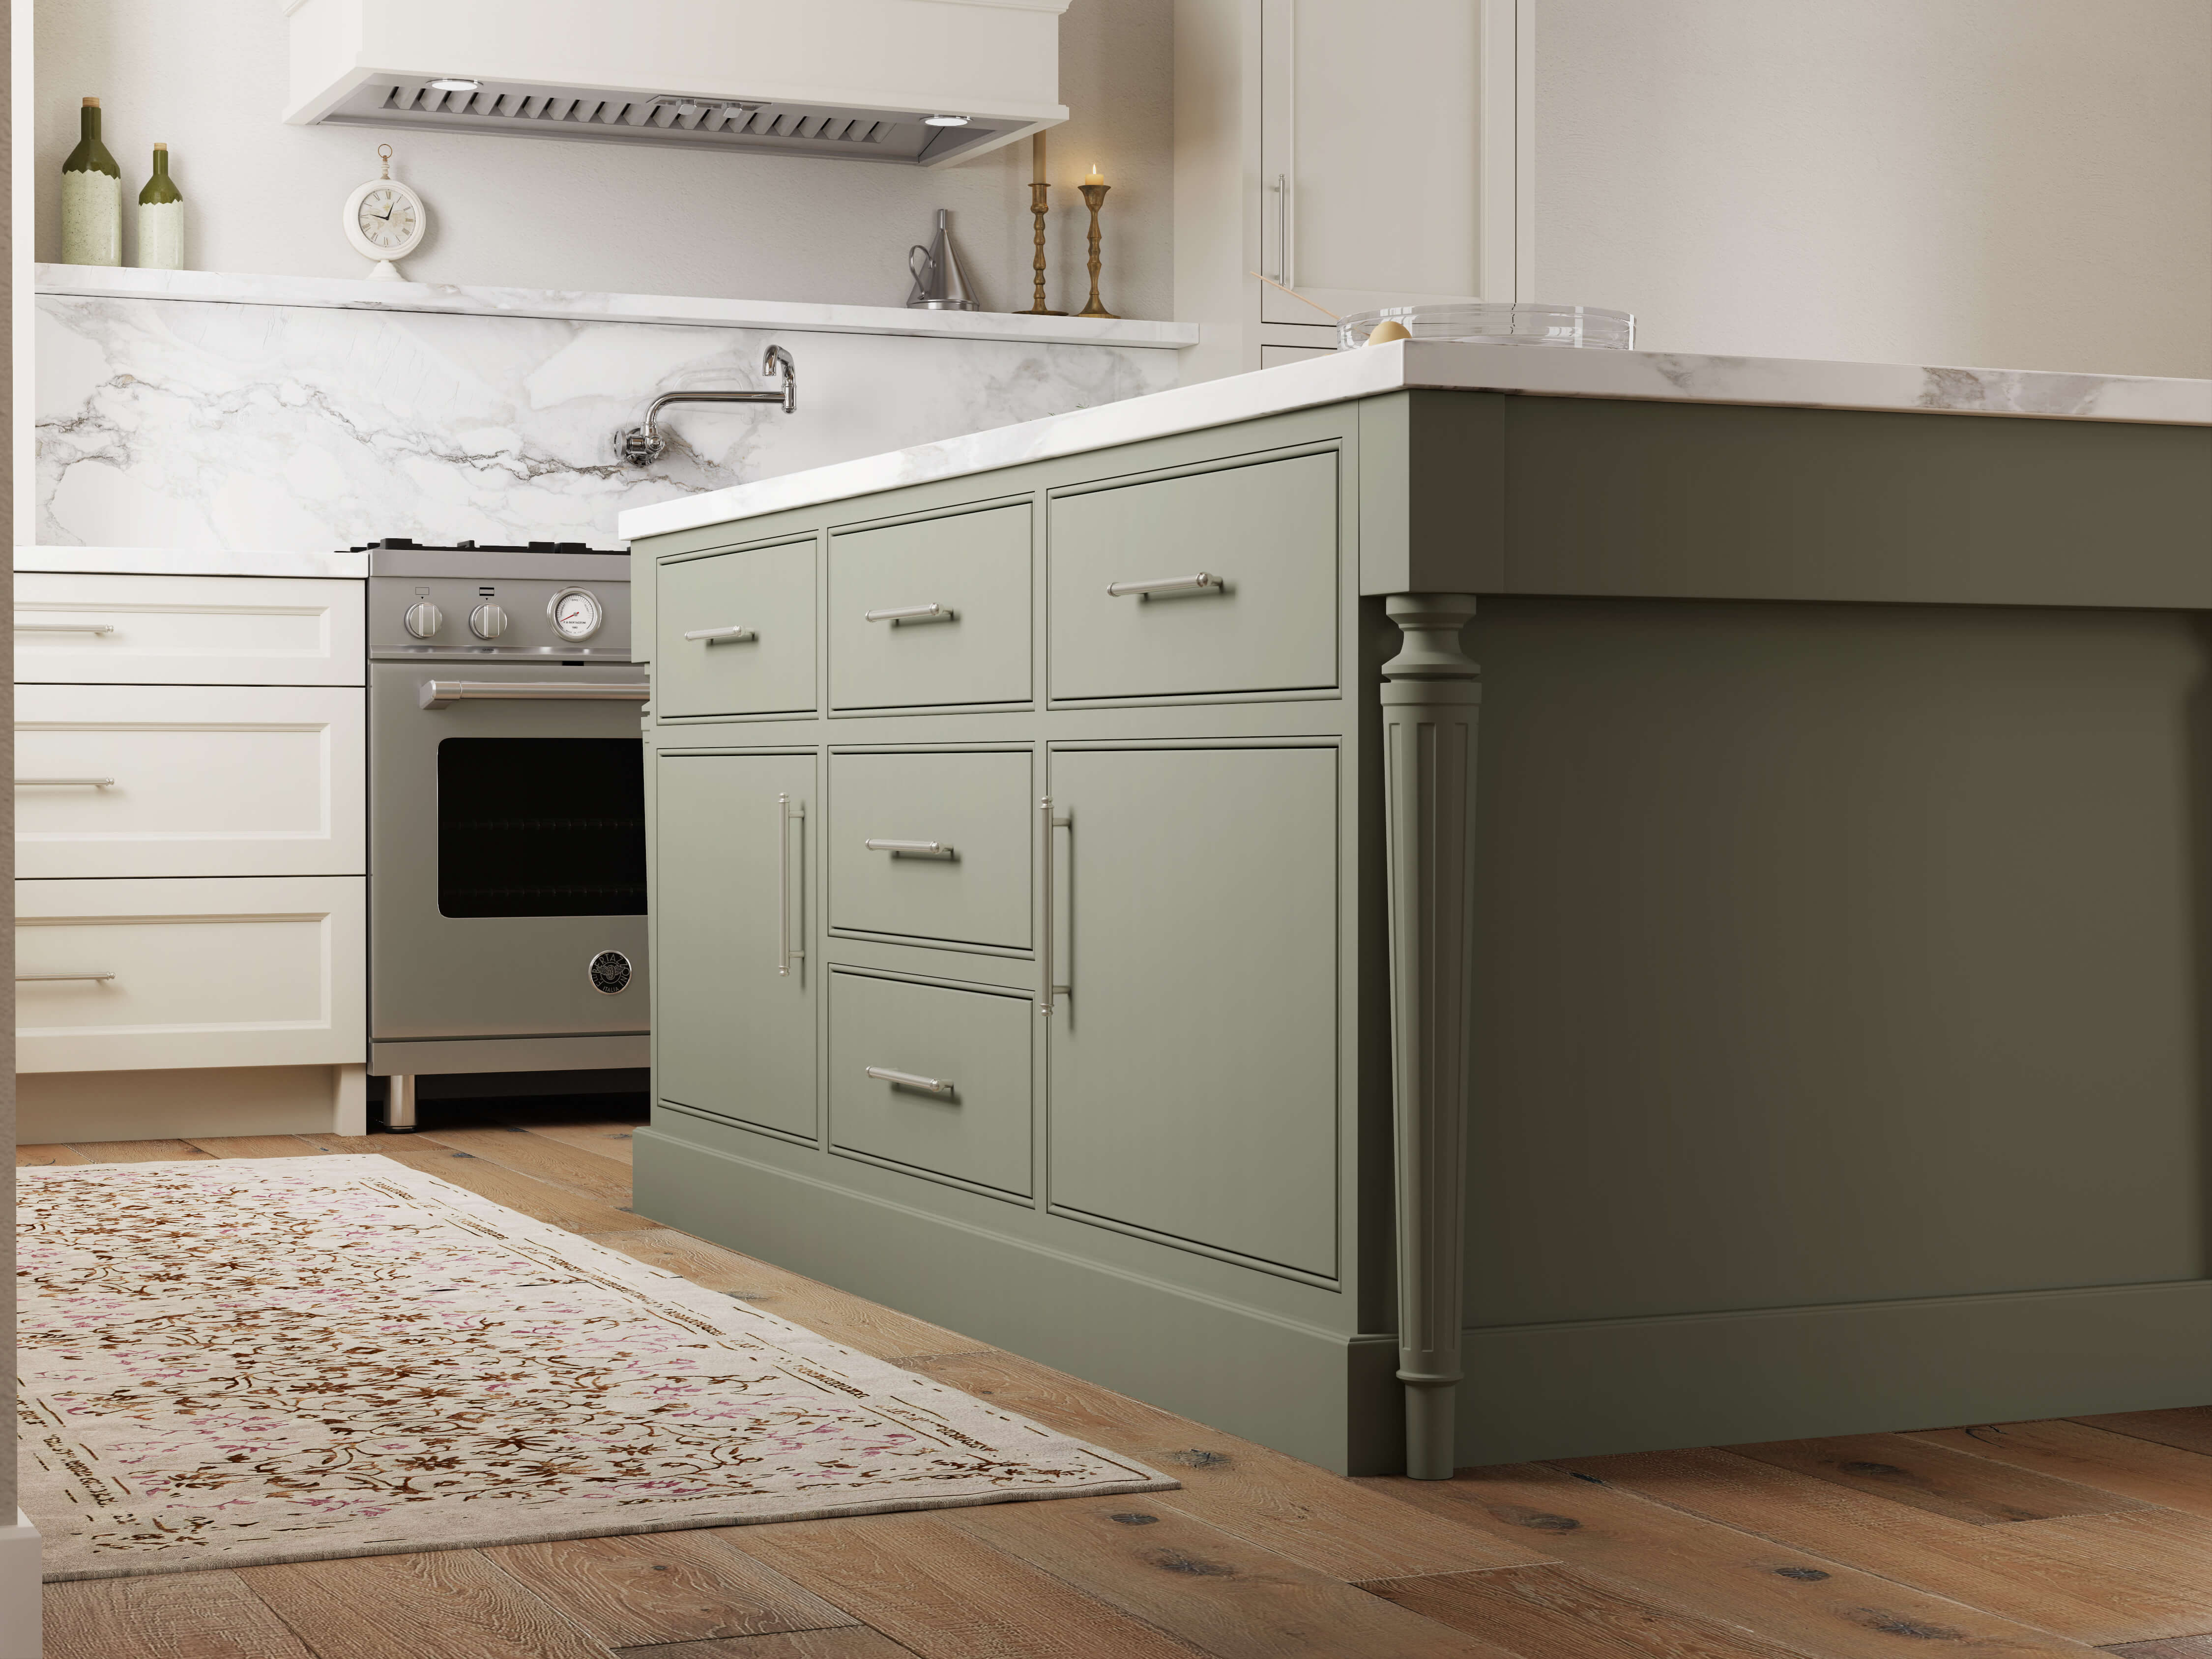 A green painted kitchen island with a furniture style look and slab inset cabinet doors with a beaded frame.